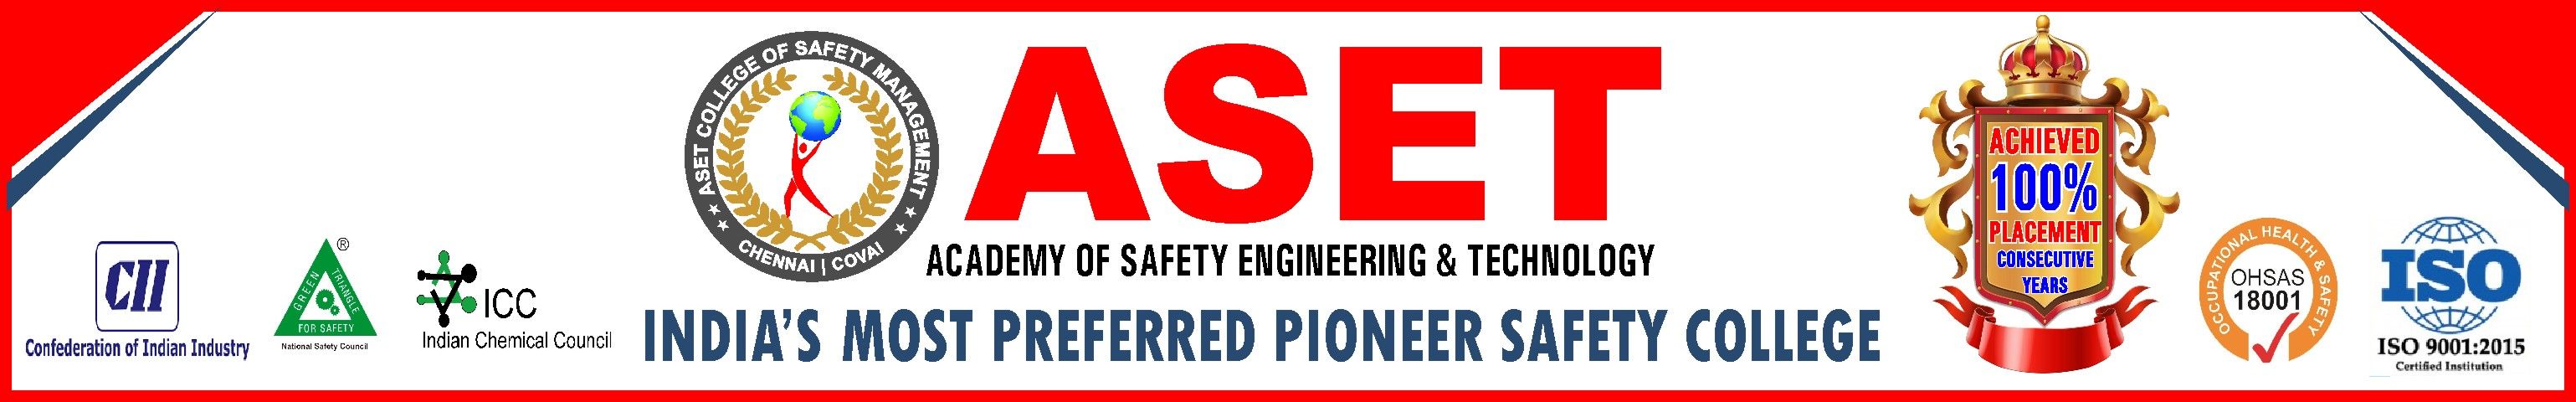 Detail About ASET College For Fire And Safety.